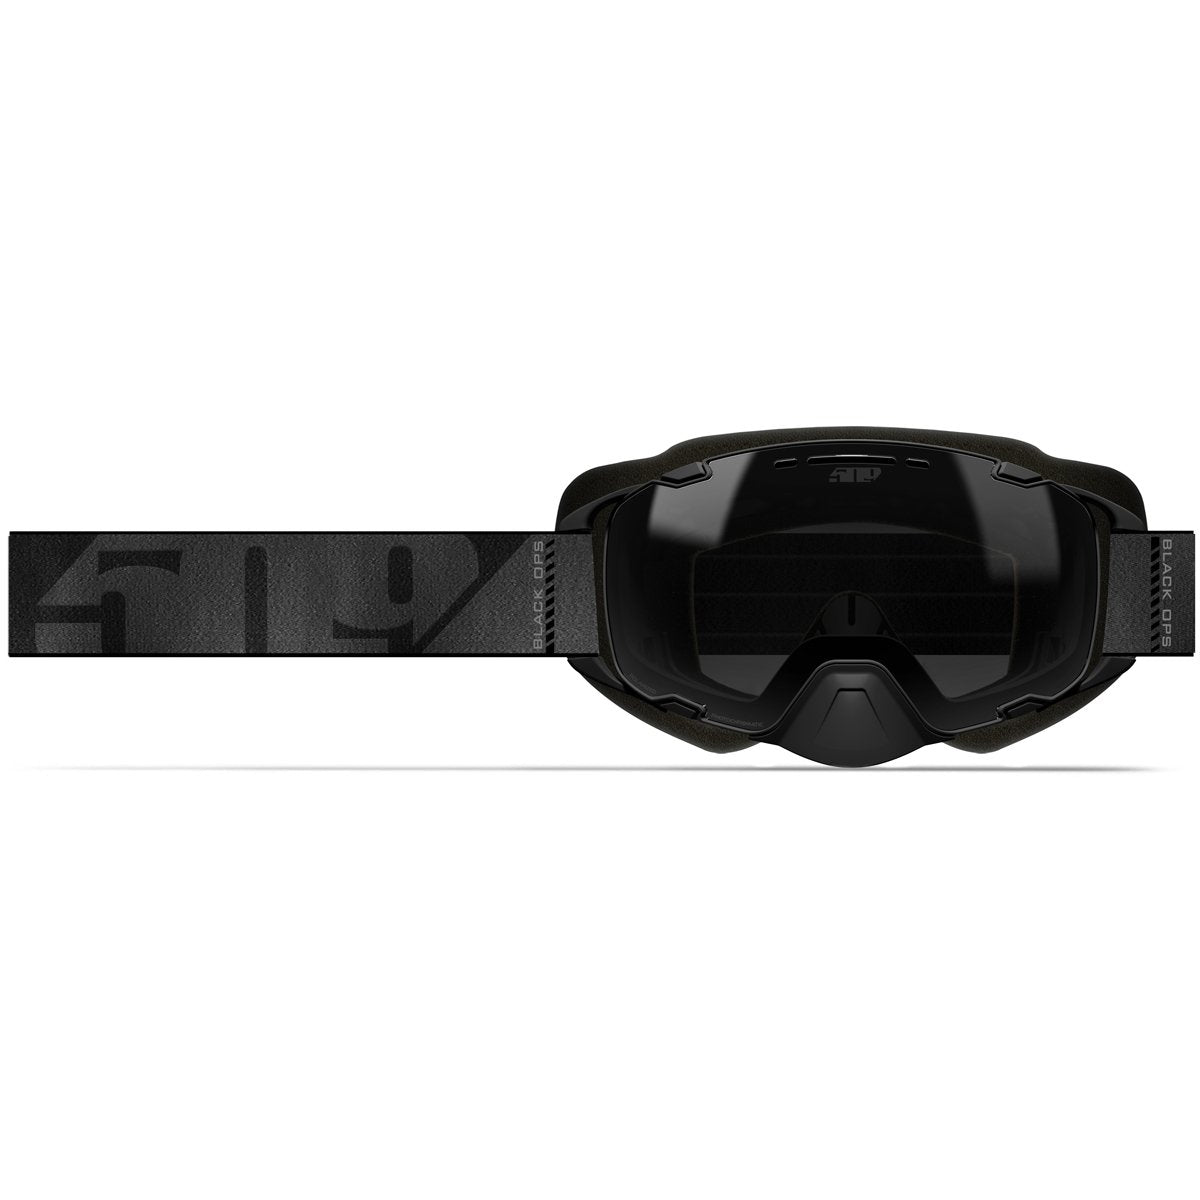 Aviator 2.0 XL Goggle - Black Ops / ONE SIZE FITS ALL